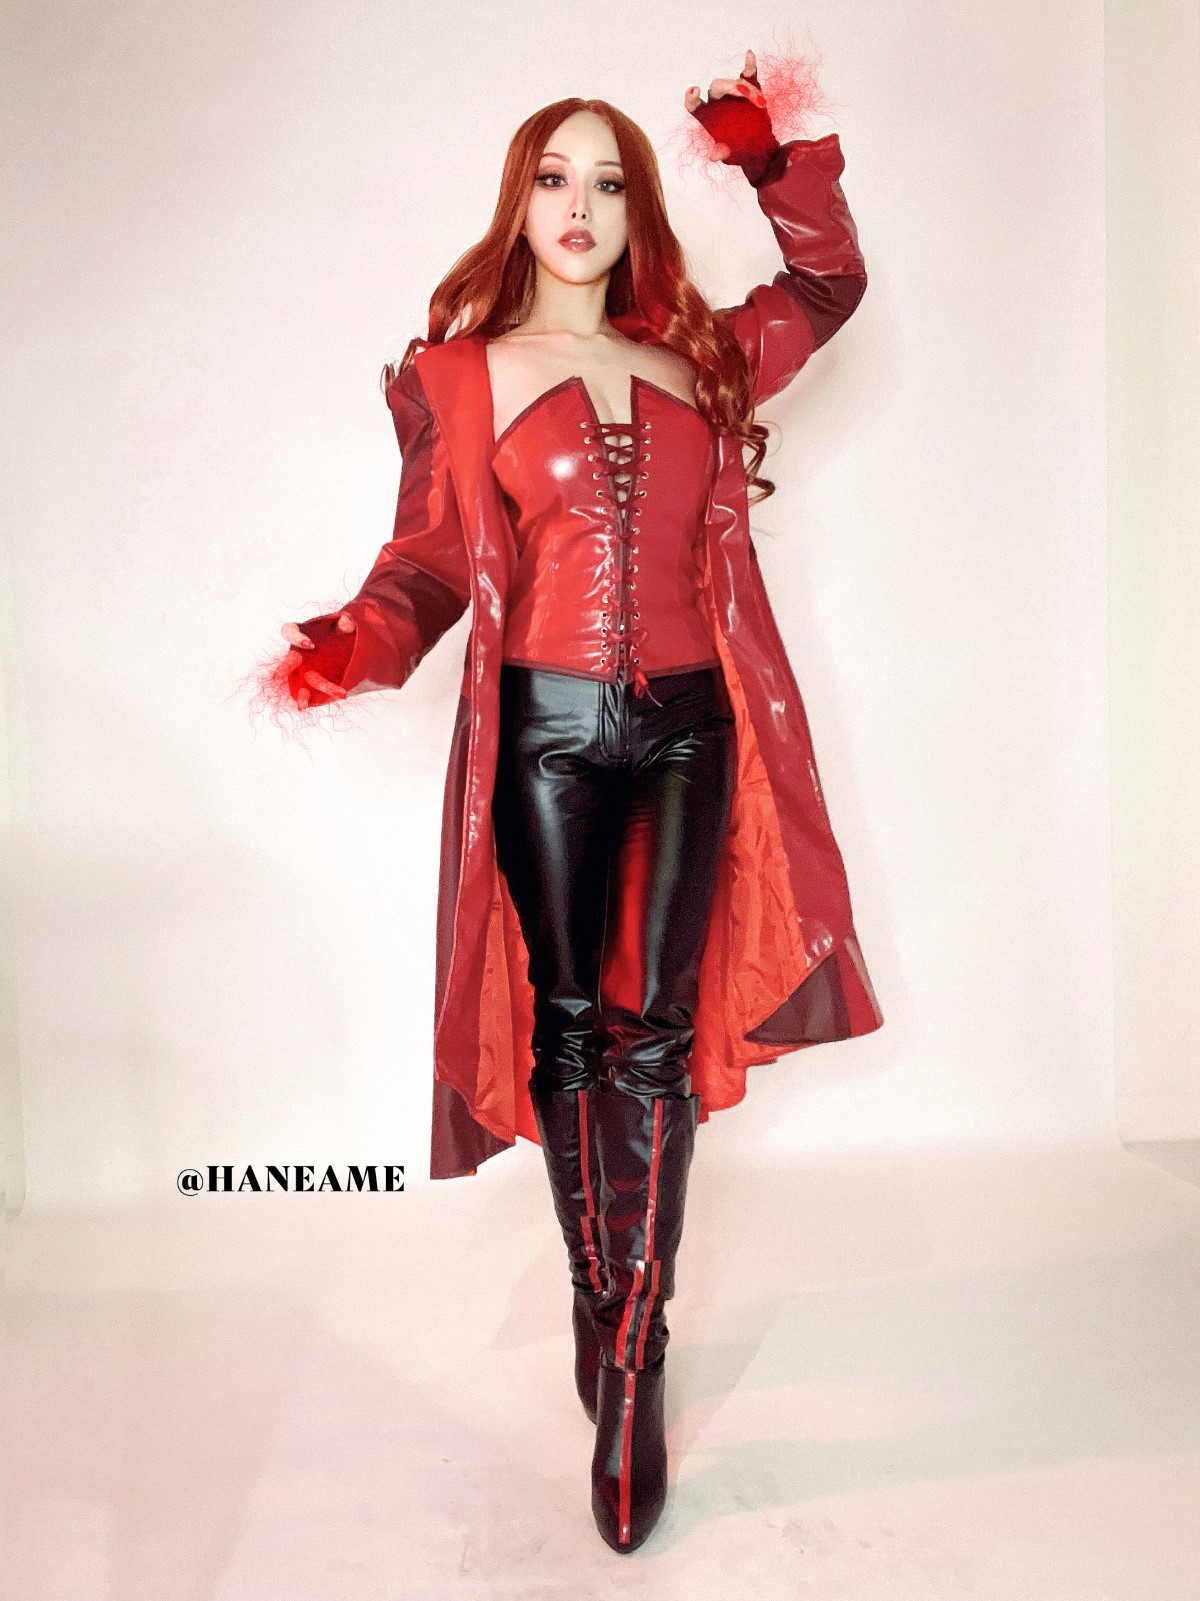 Coser@HaneAme Scarlet Witch 0039 7050443264.jpg